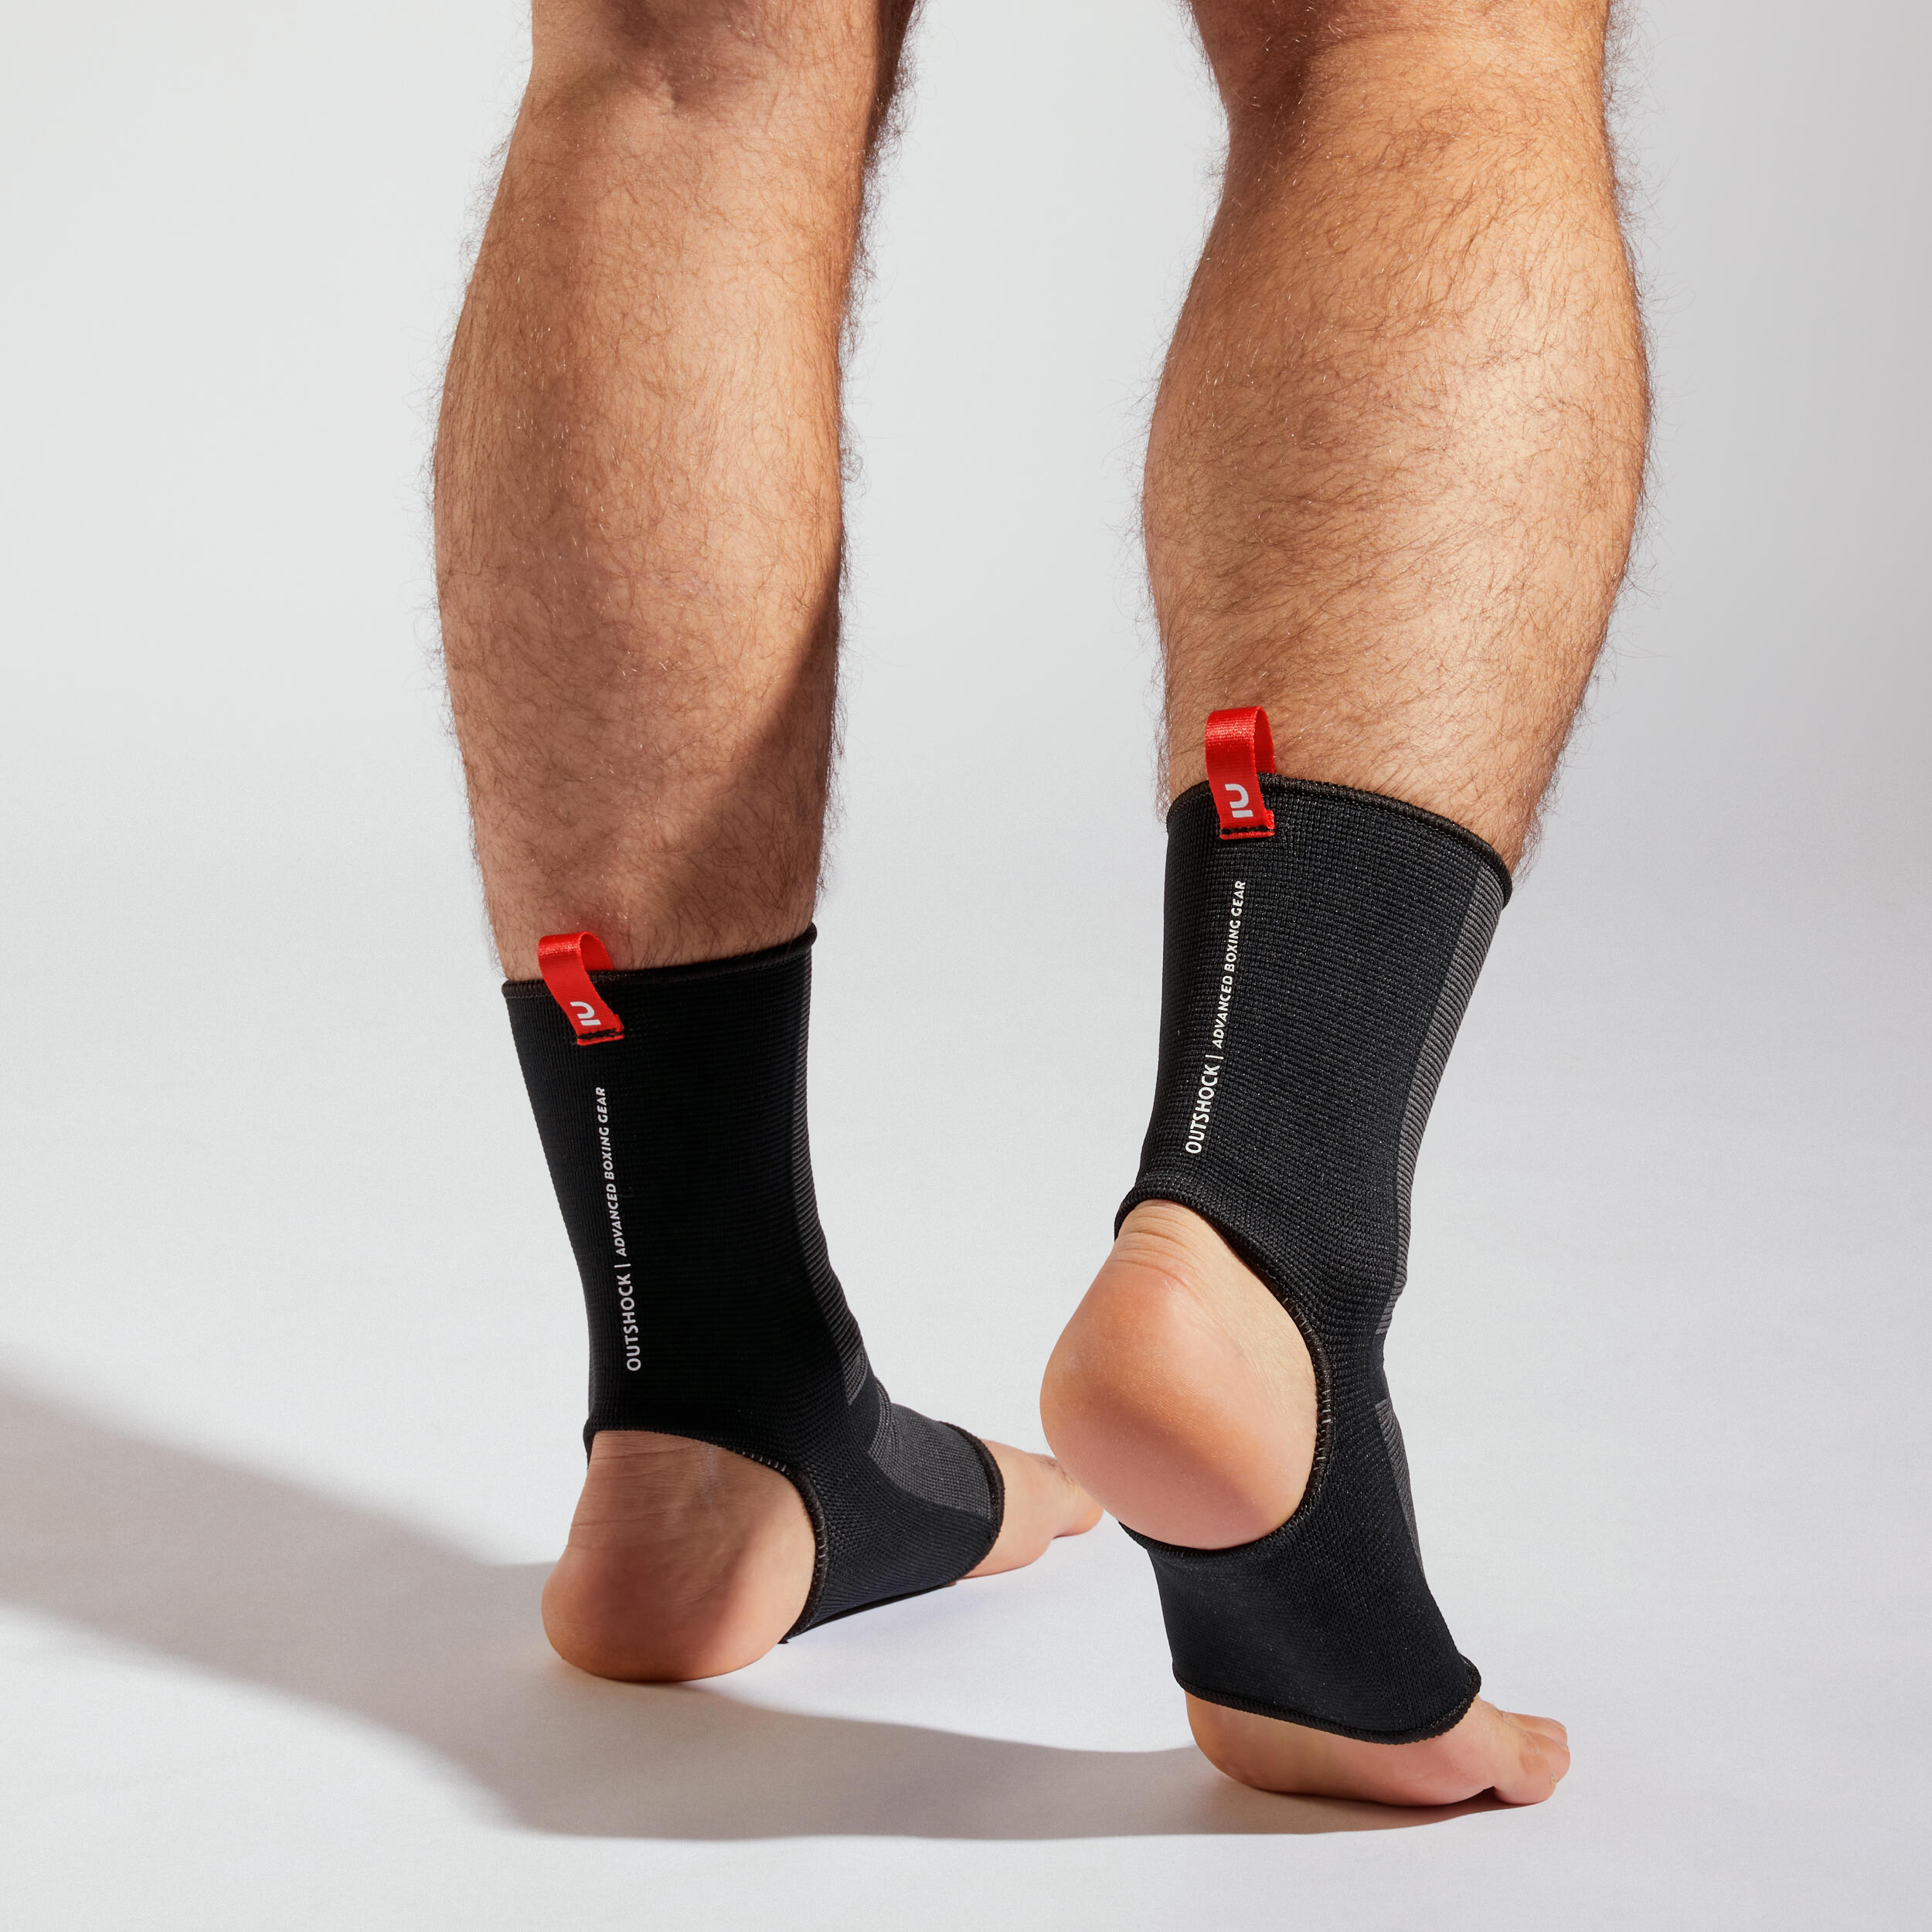 Adult Muay Thai Ankle Support - Black/Red 3/5